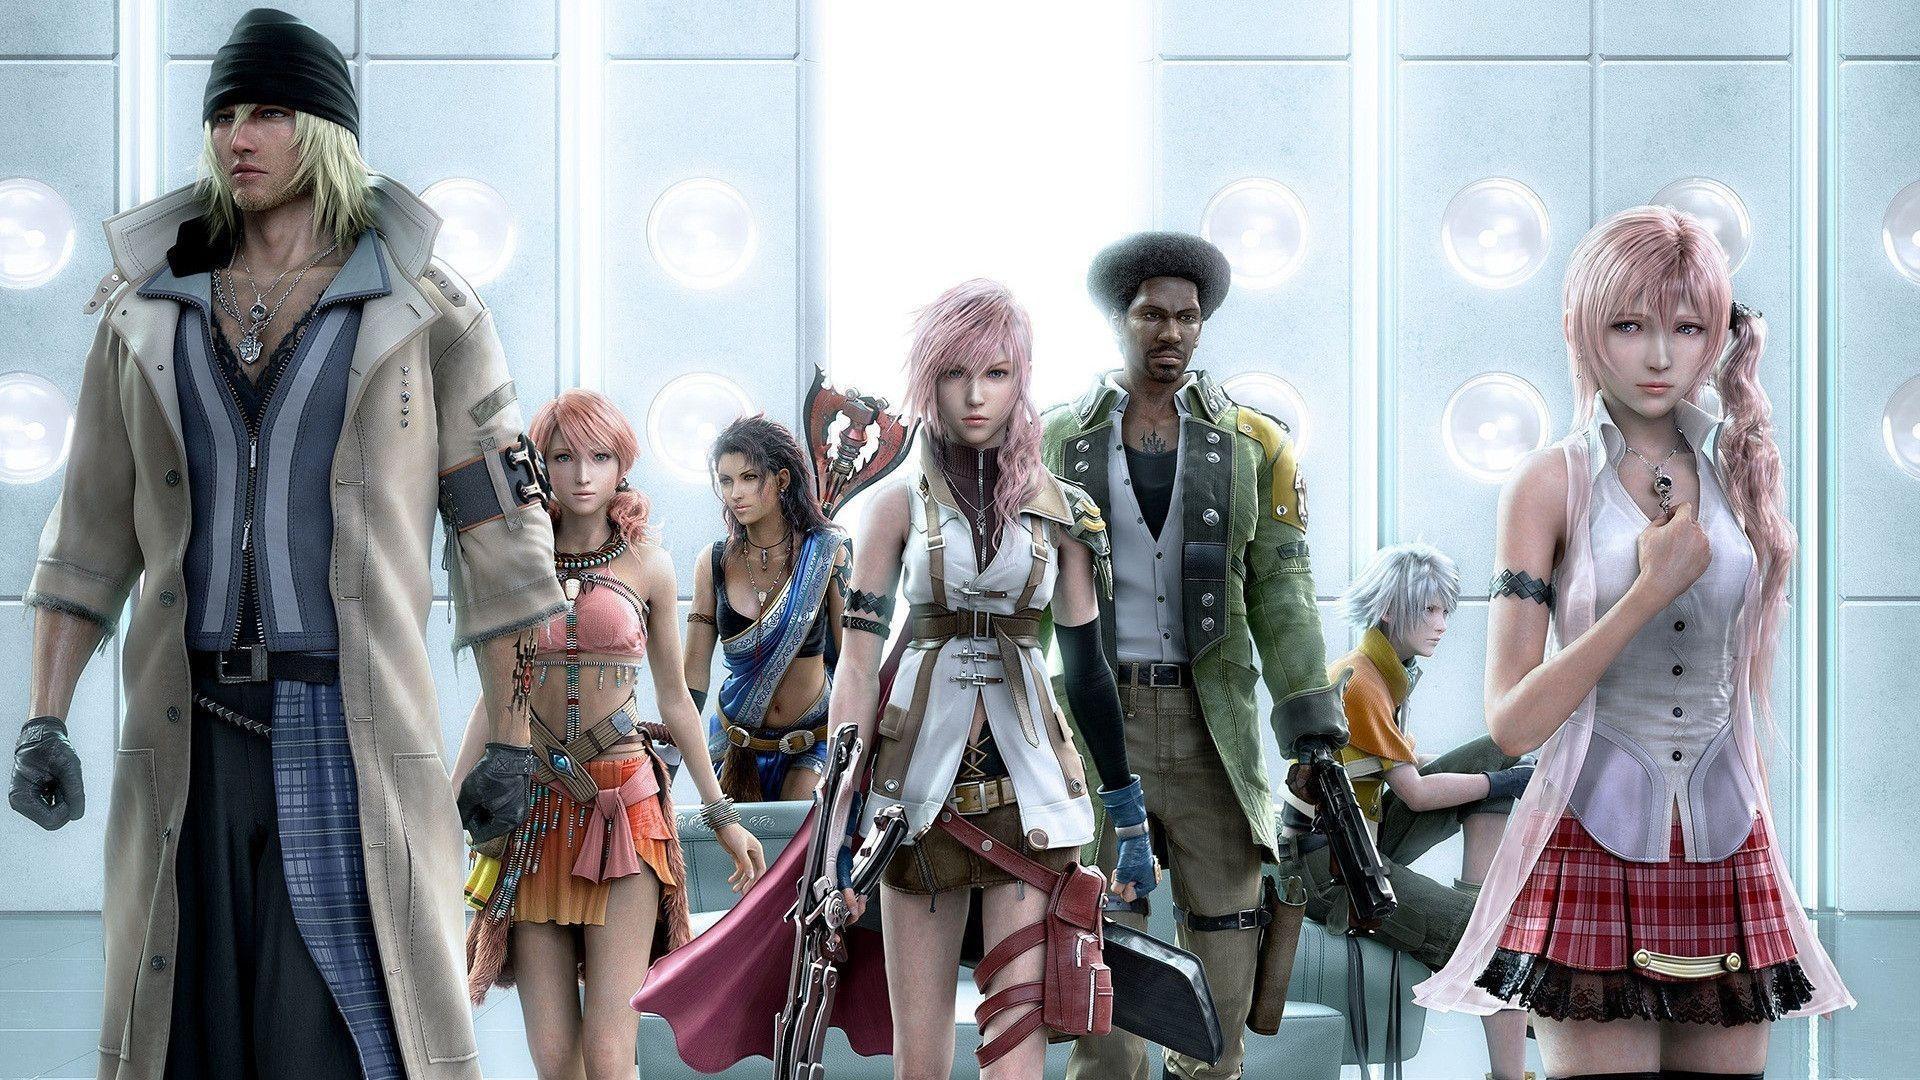 final fantasy xiii game 4 wallpaper Search Engine